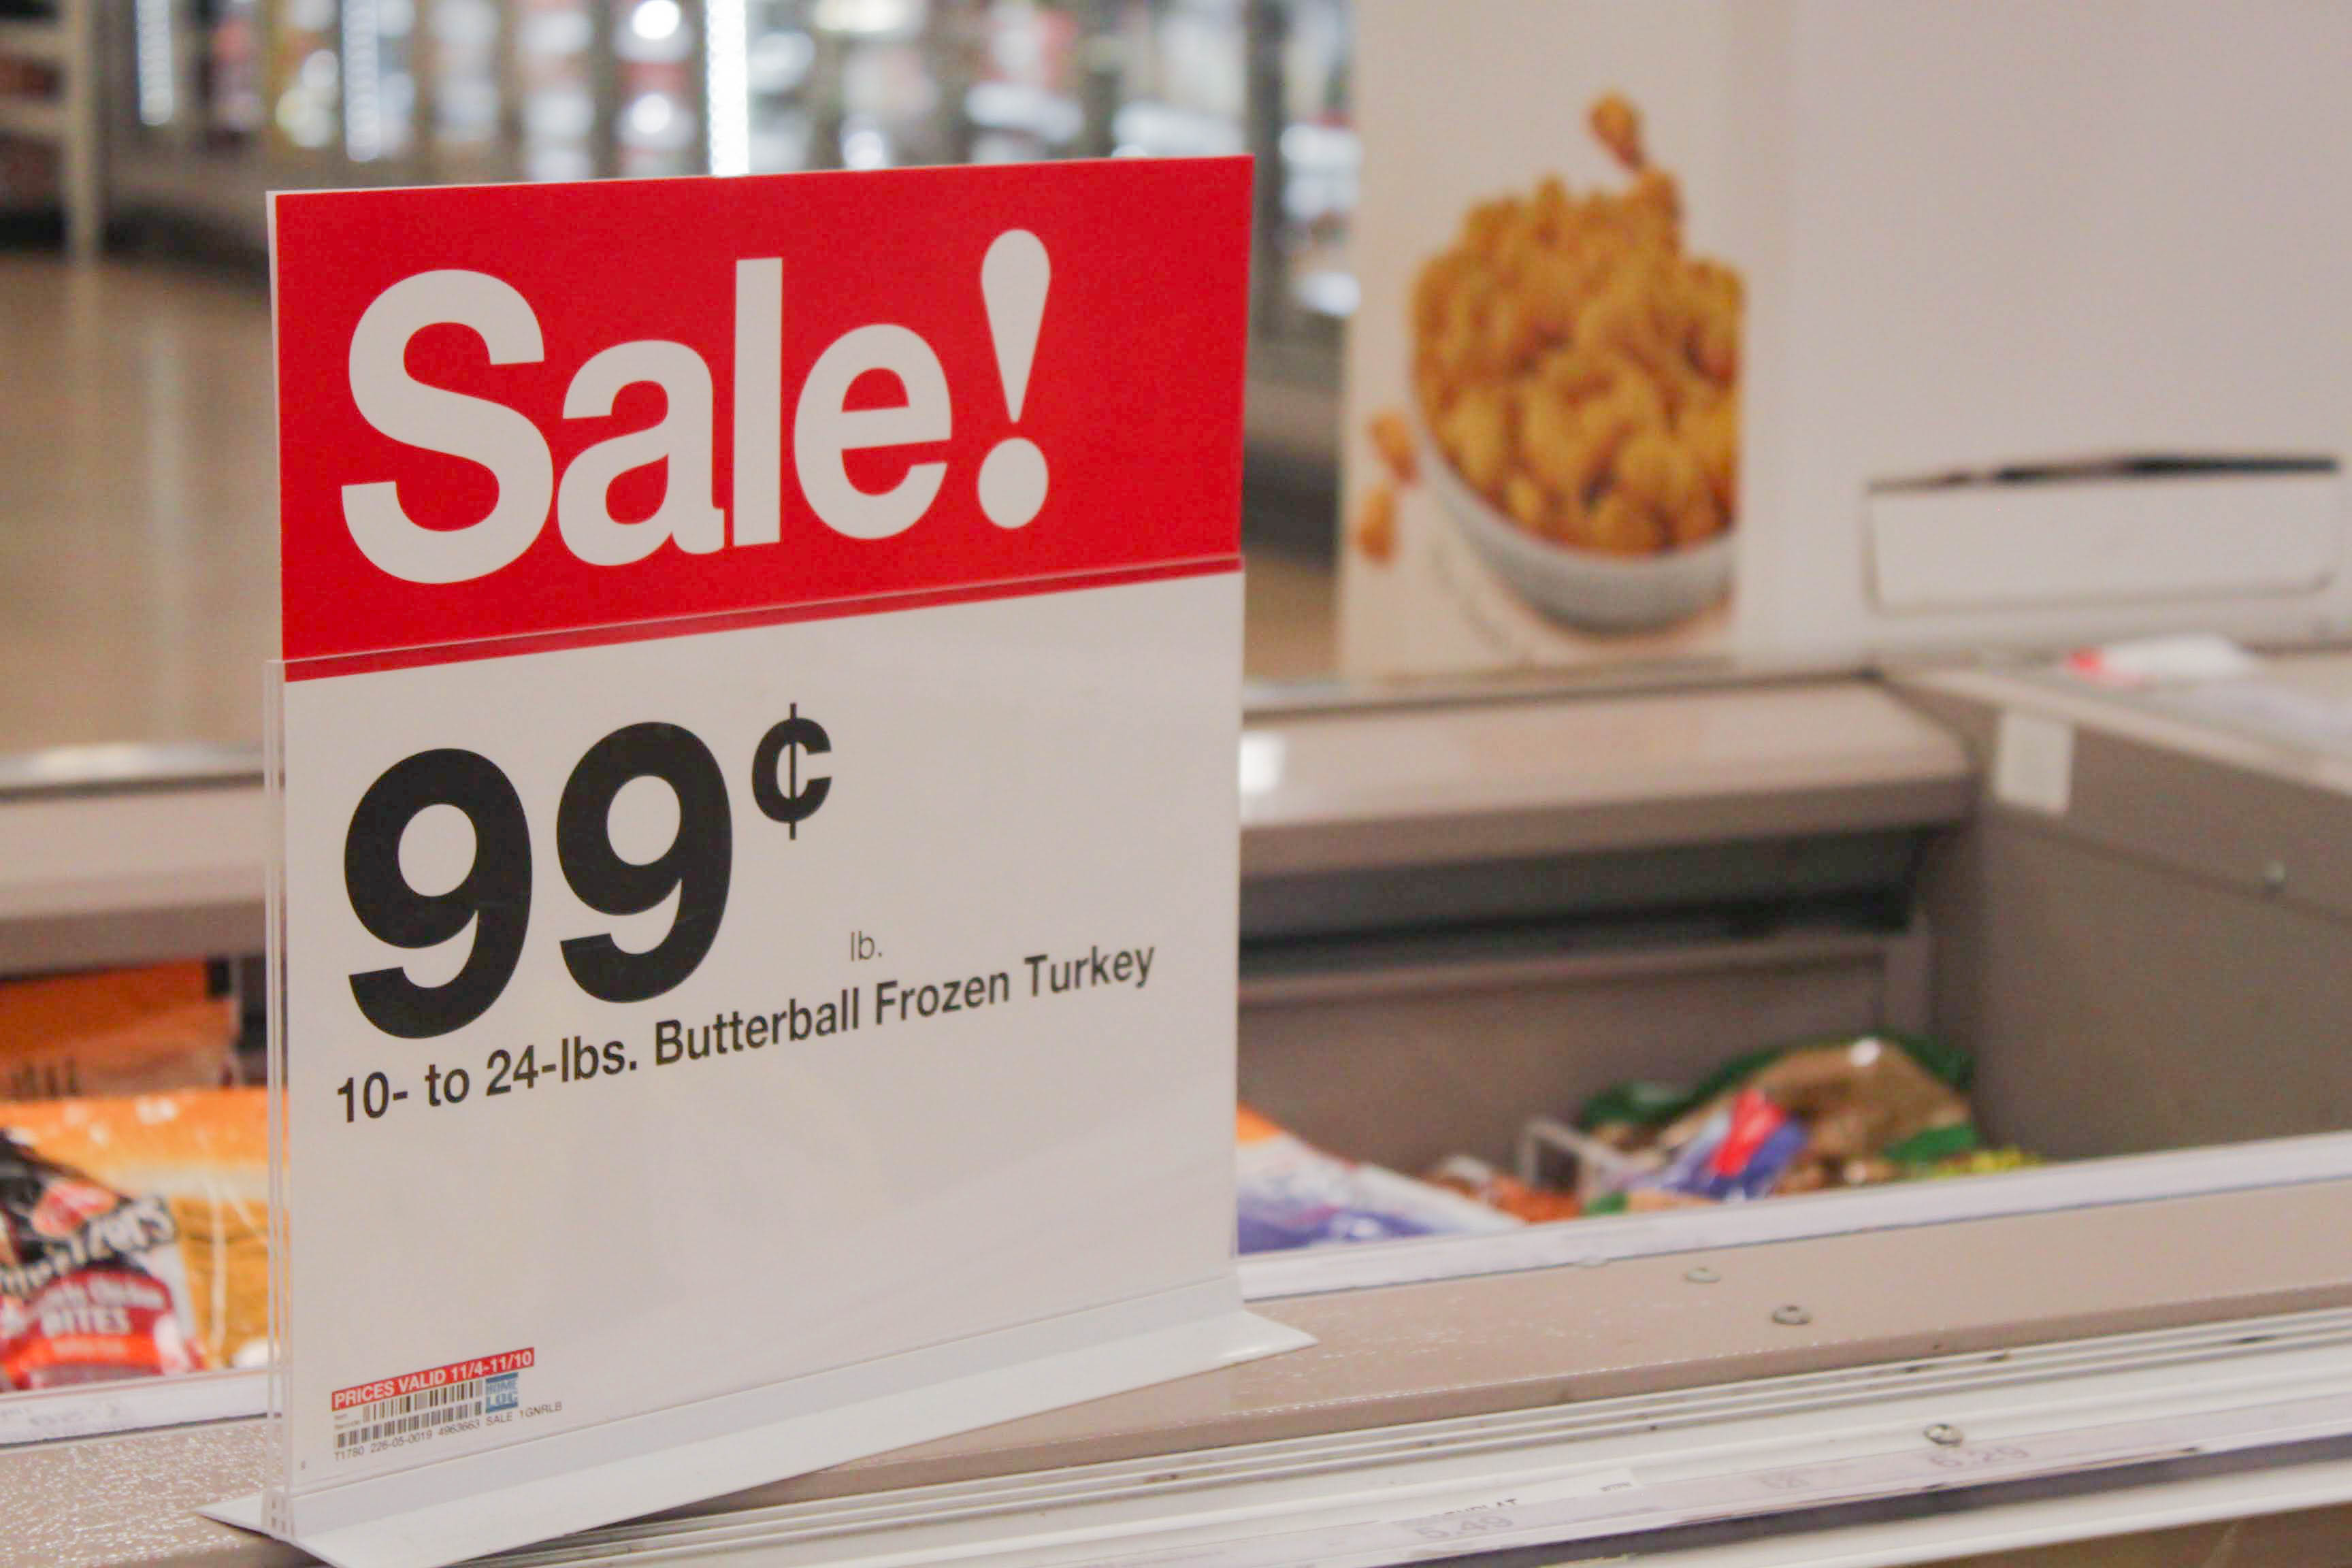 OPINION: Stores should be closed on Thanksgiving